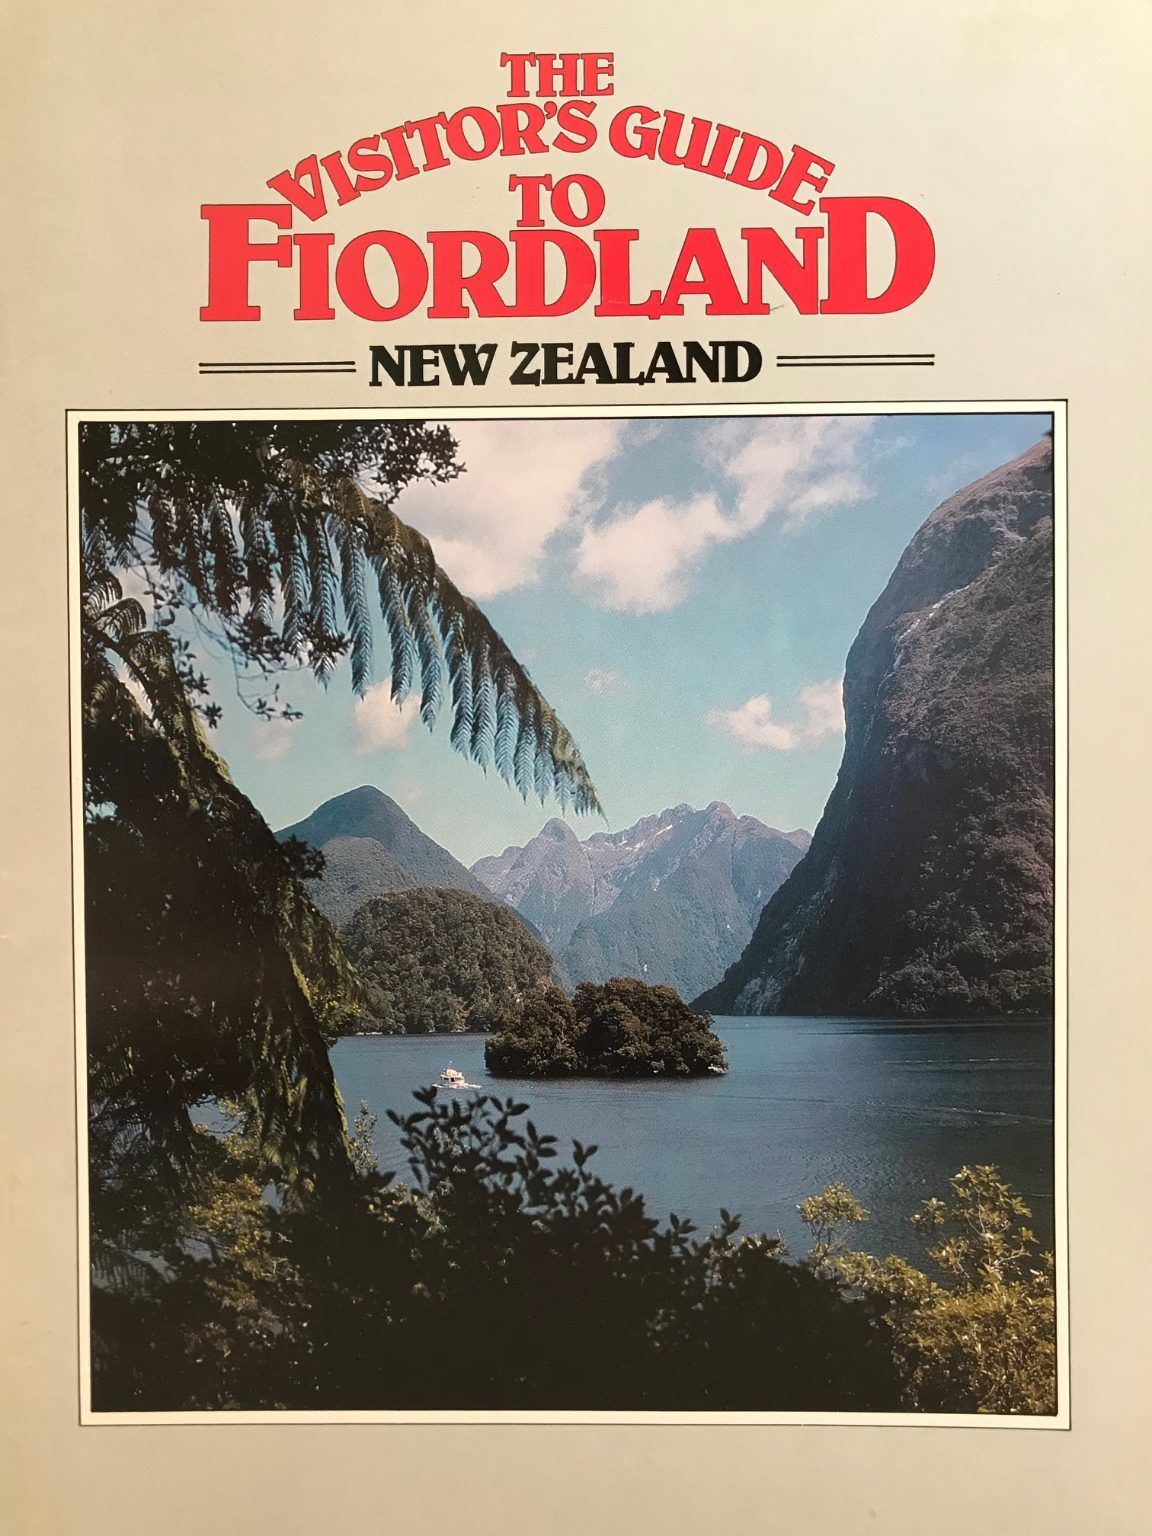 THE VISITORS GUIDE TO FIORDLAND NEW ZEALAND